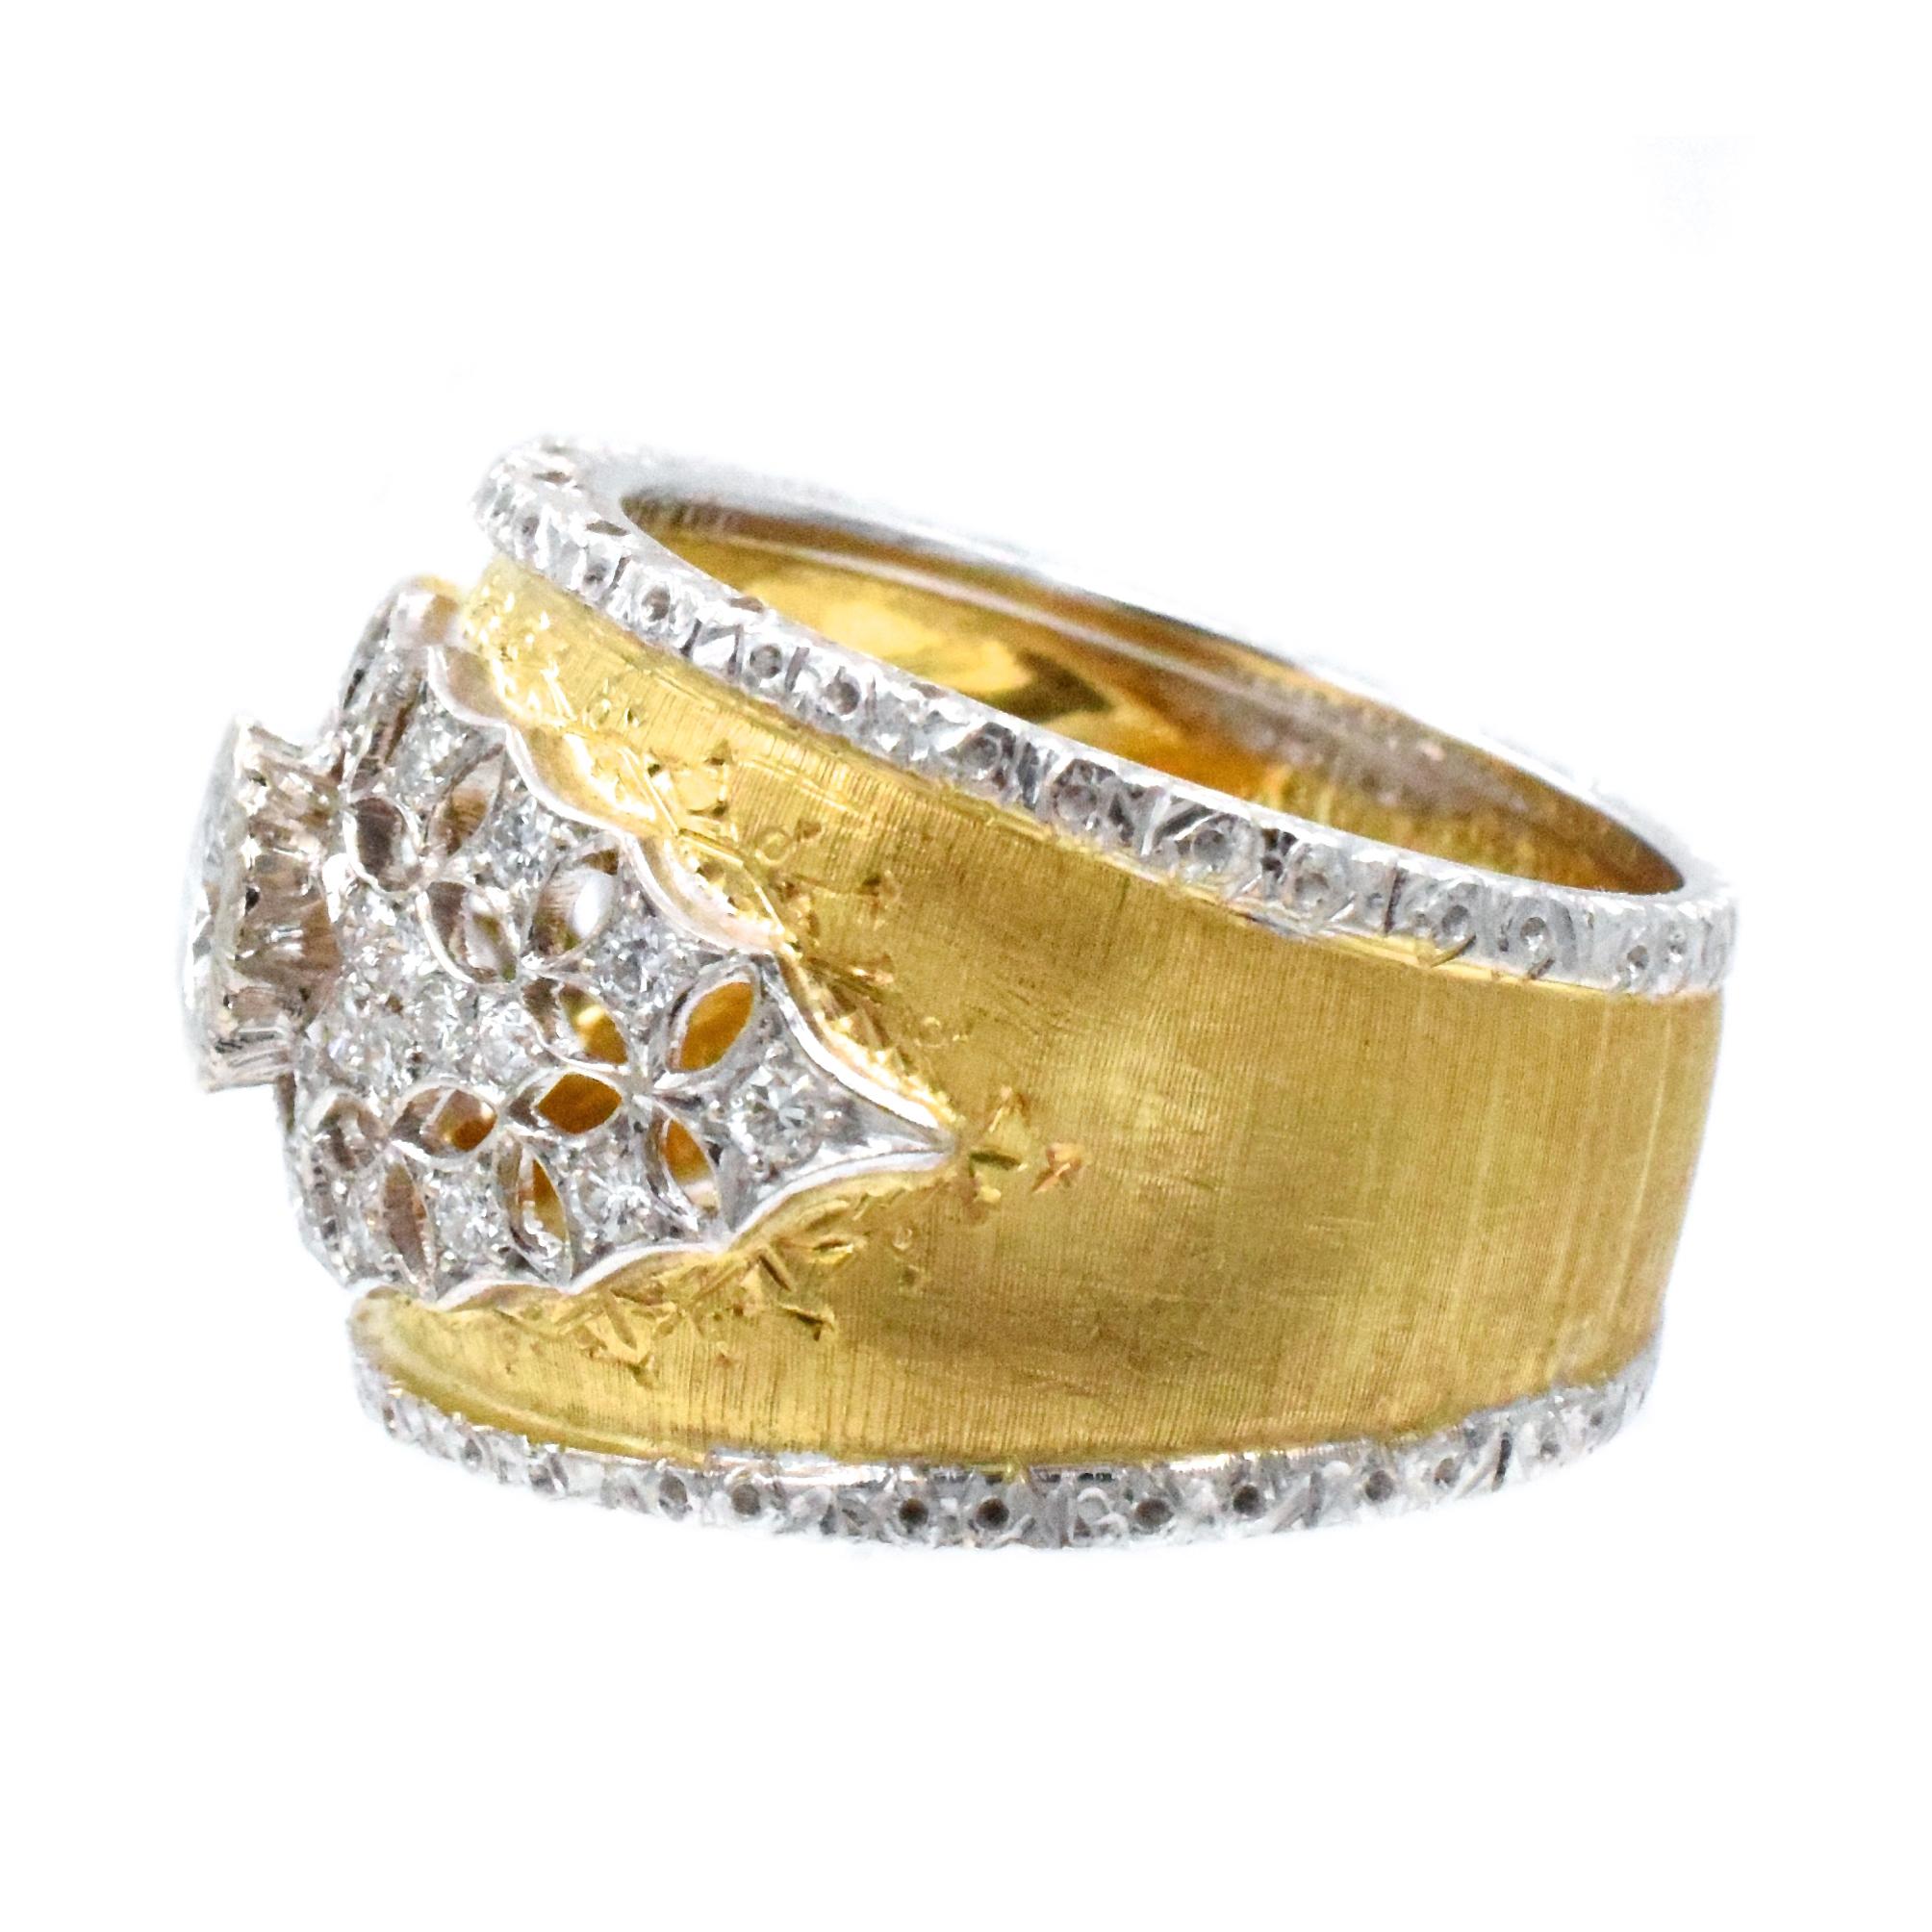 Mario Buccelatti !!!!
This exquisite band  from Mario Buccellati has an air of elegance that is incomparable! Buccellati 